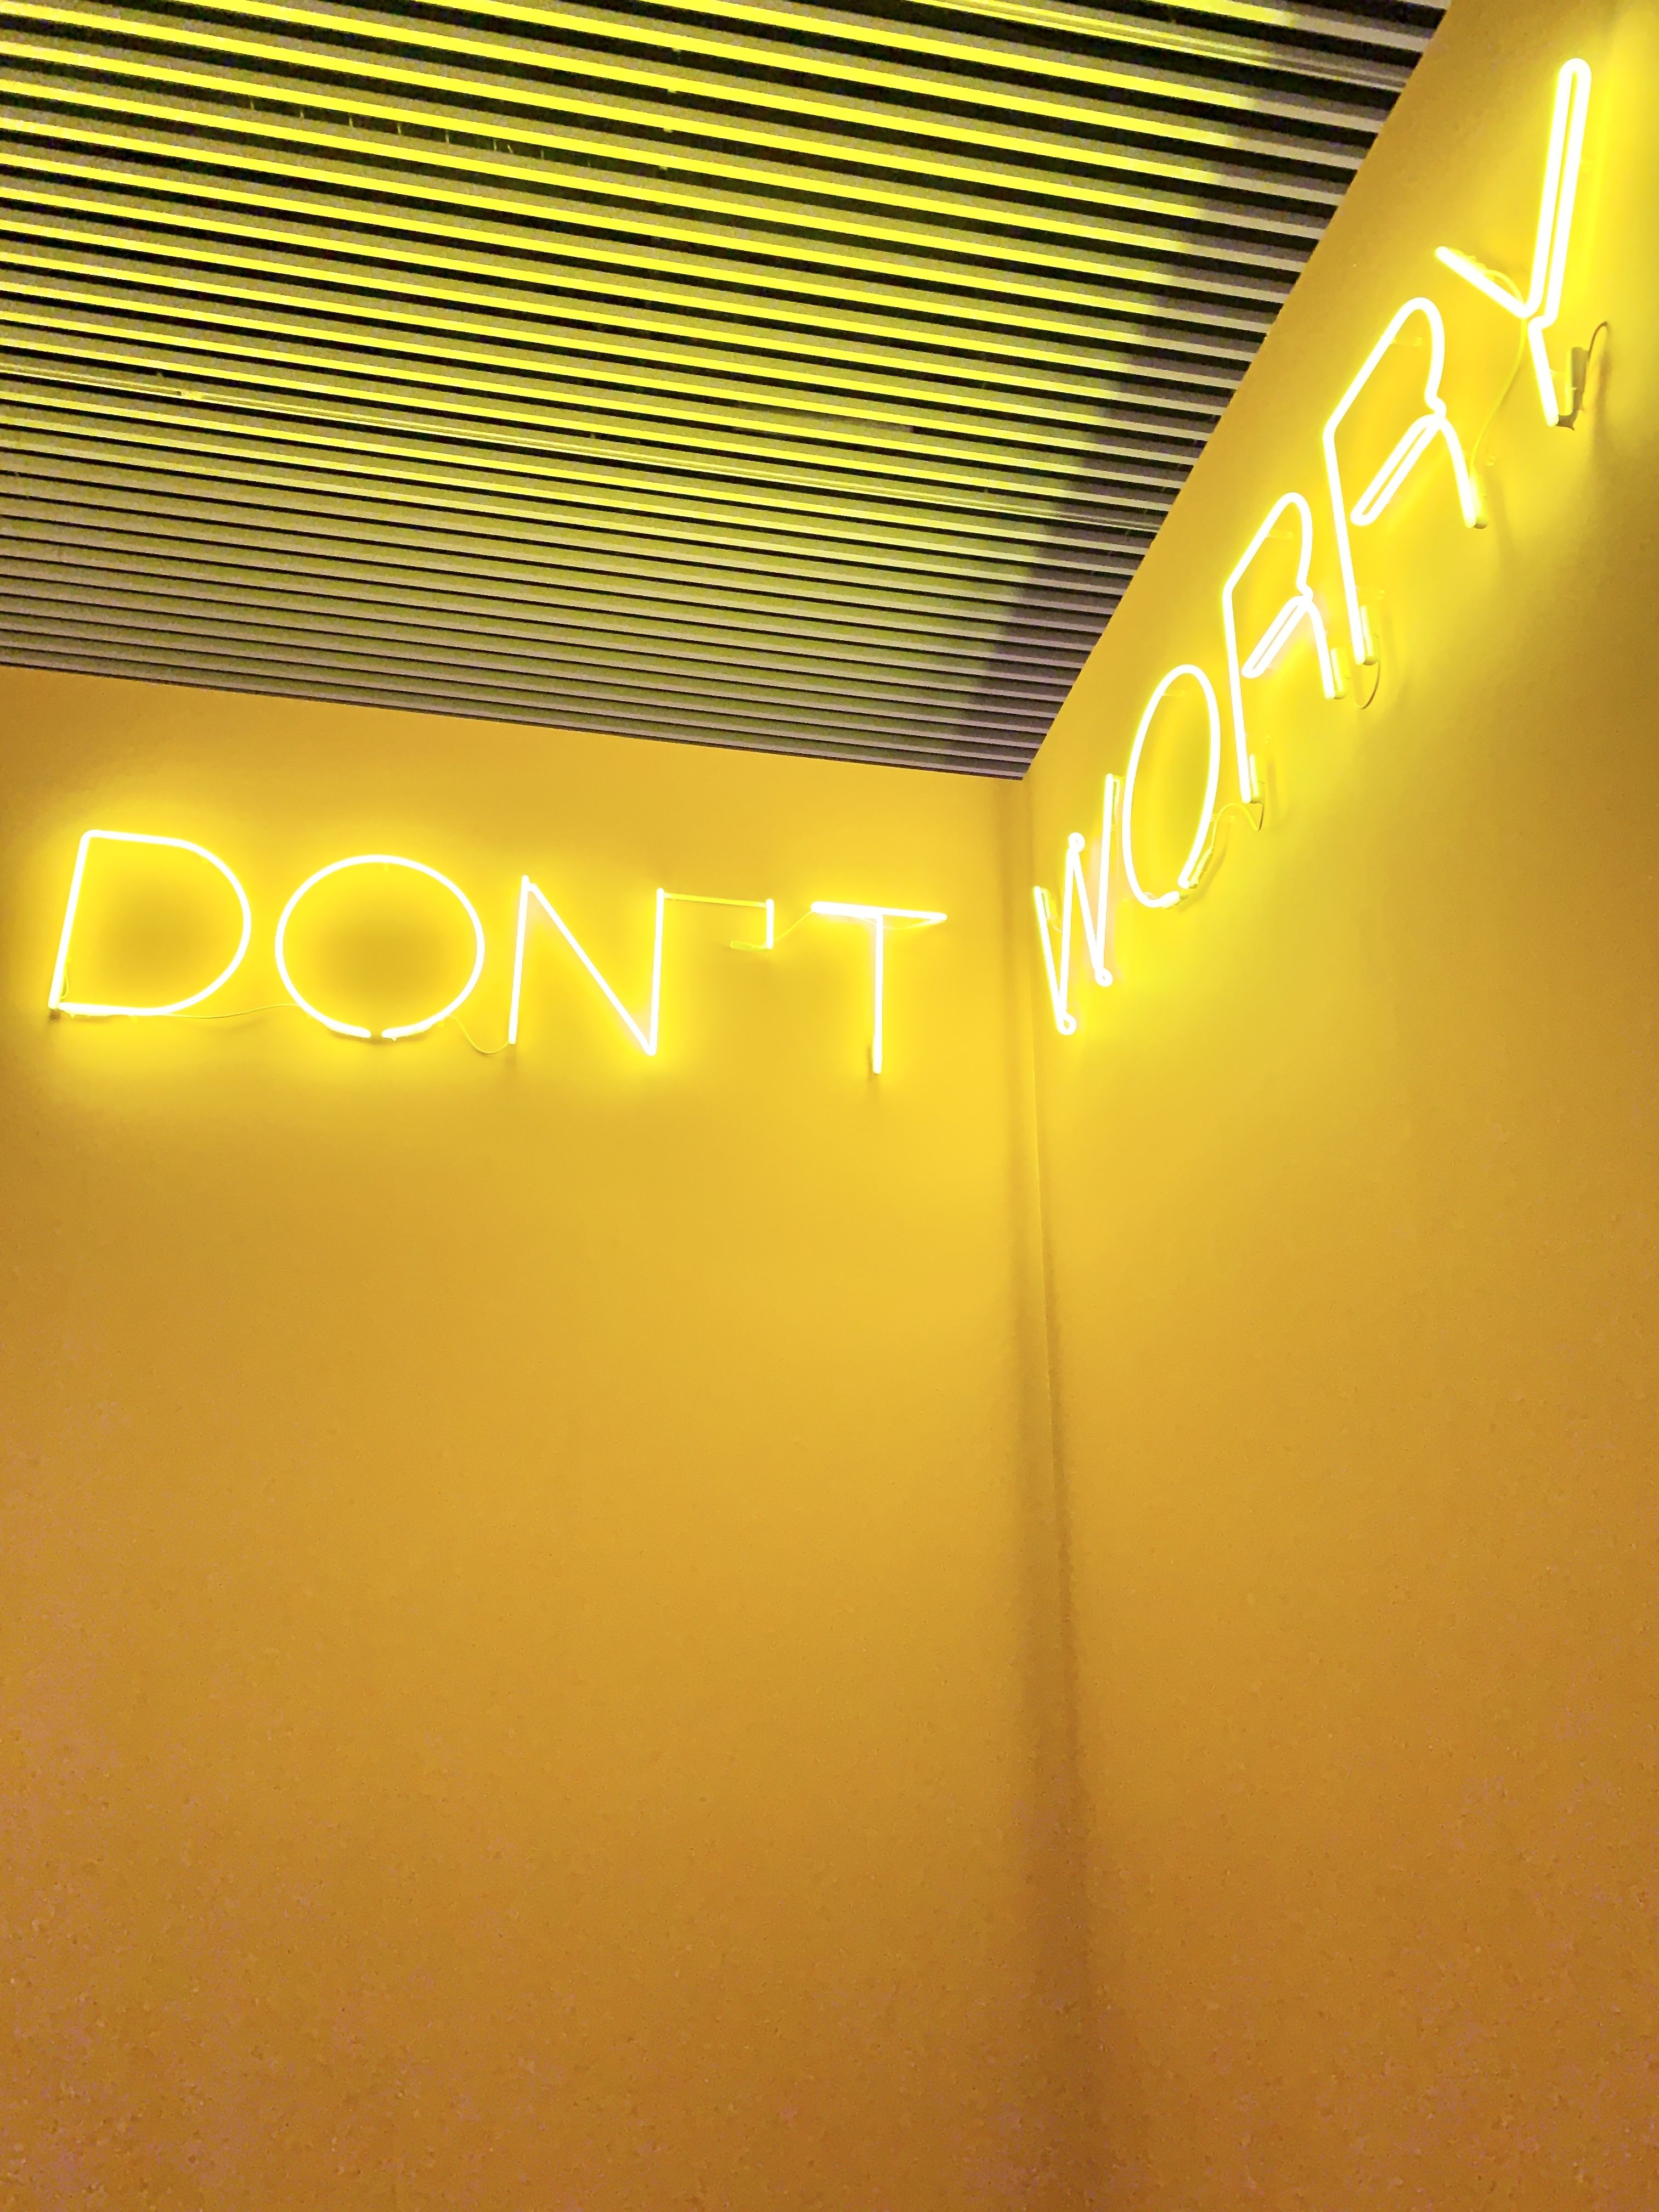 A 'don't worry' sign in neon lights on a yellow wall. - Neon yellow